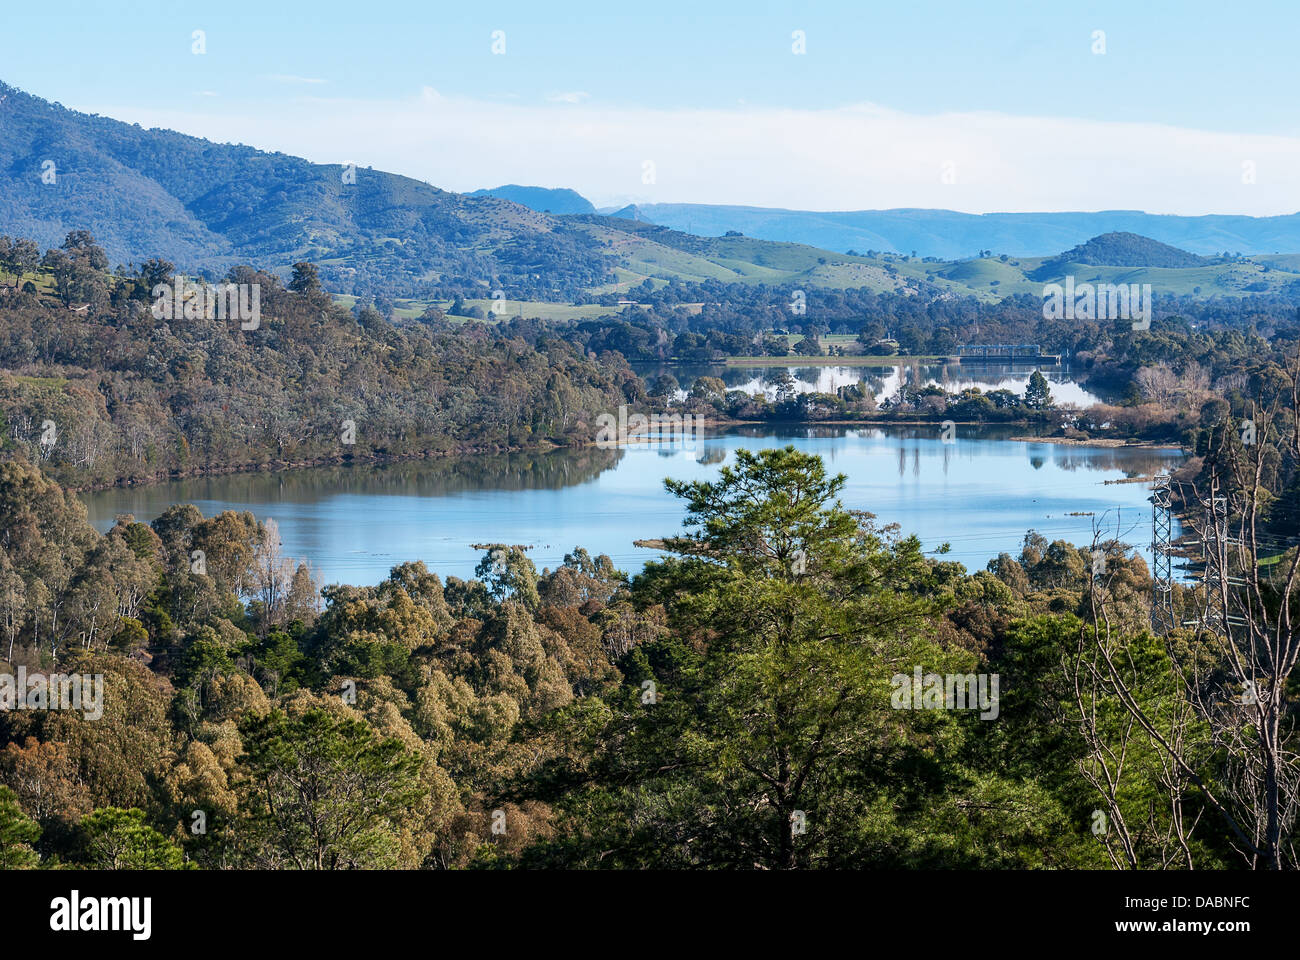 Beautiful serene scenes from Lake Eildon which is both a drinking water storage system and a holiday destination. Stock Photo